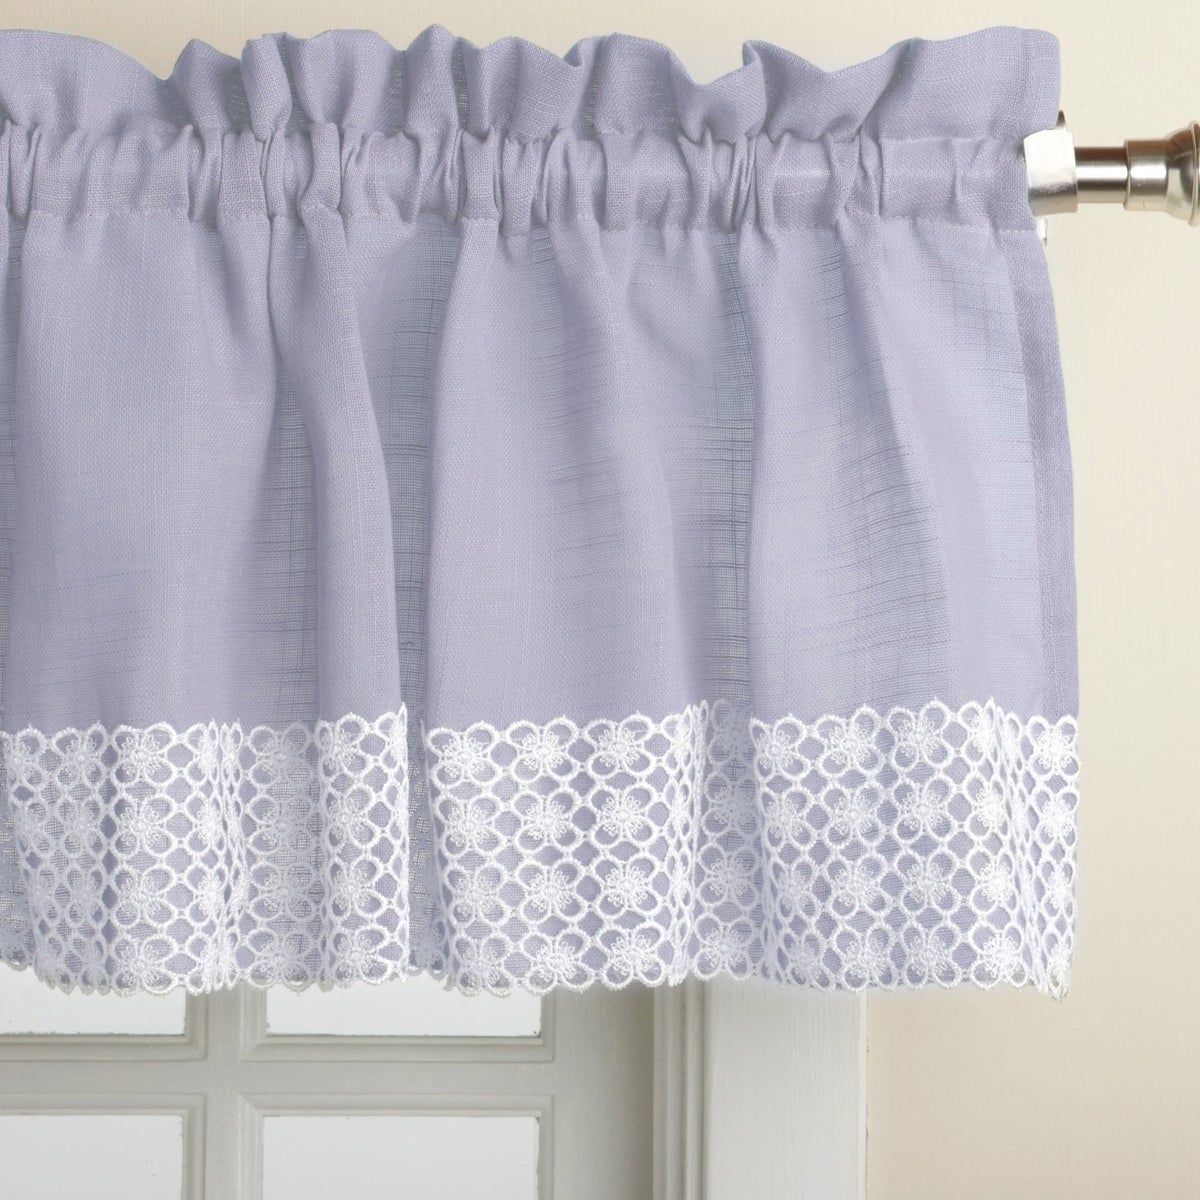 Blue Country Style Kitchen Curtains With White Daisy Lace Accent Pertaining To French Vanilla Country Style Curtain Parts With White Daisy Lace Accent (View 7 of 20)